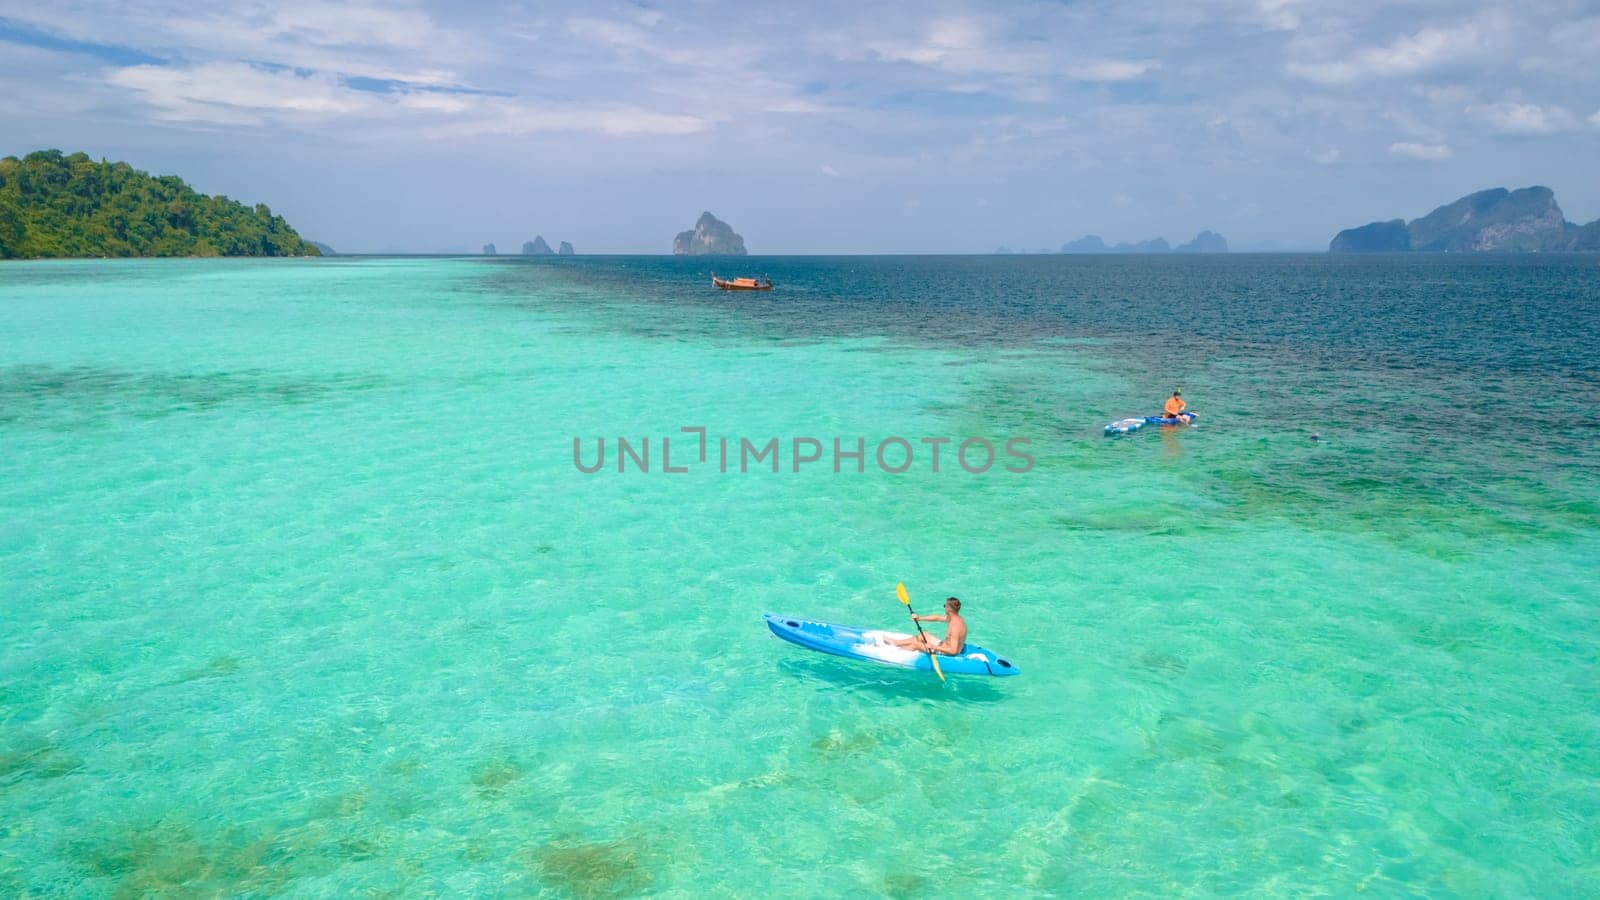 Young men in a kayak at the bleu turqouse colored ocean of Koh Kradan a tropical island with a coral reef in the ocean, Koh Kradan Trang Thailand